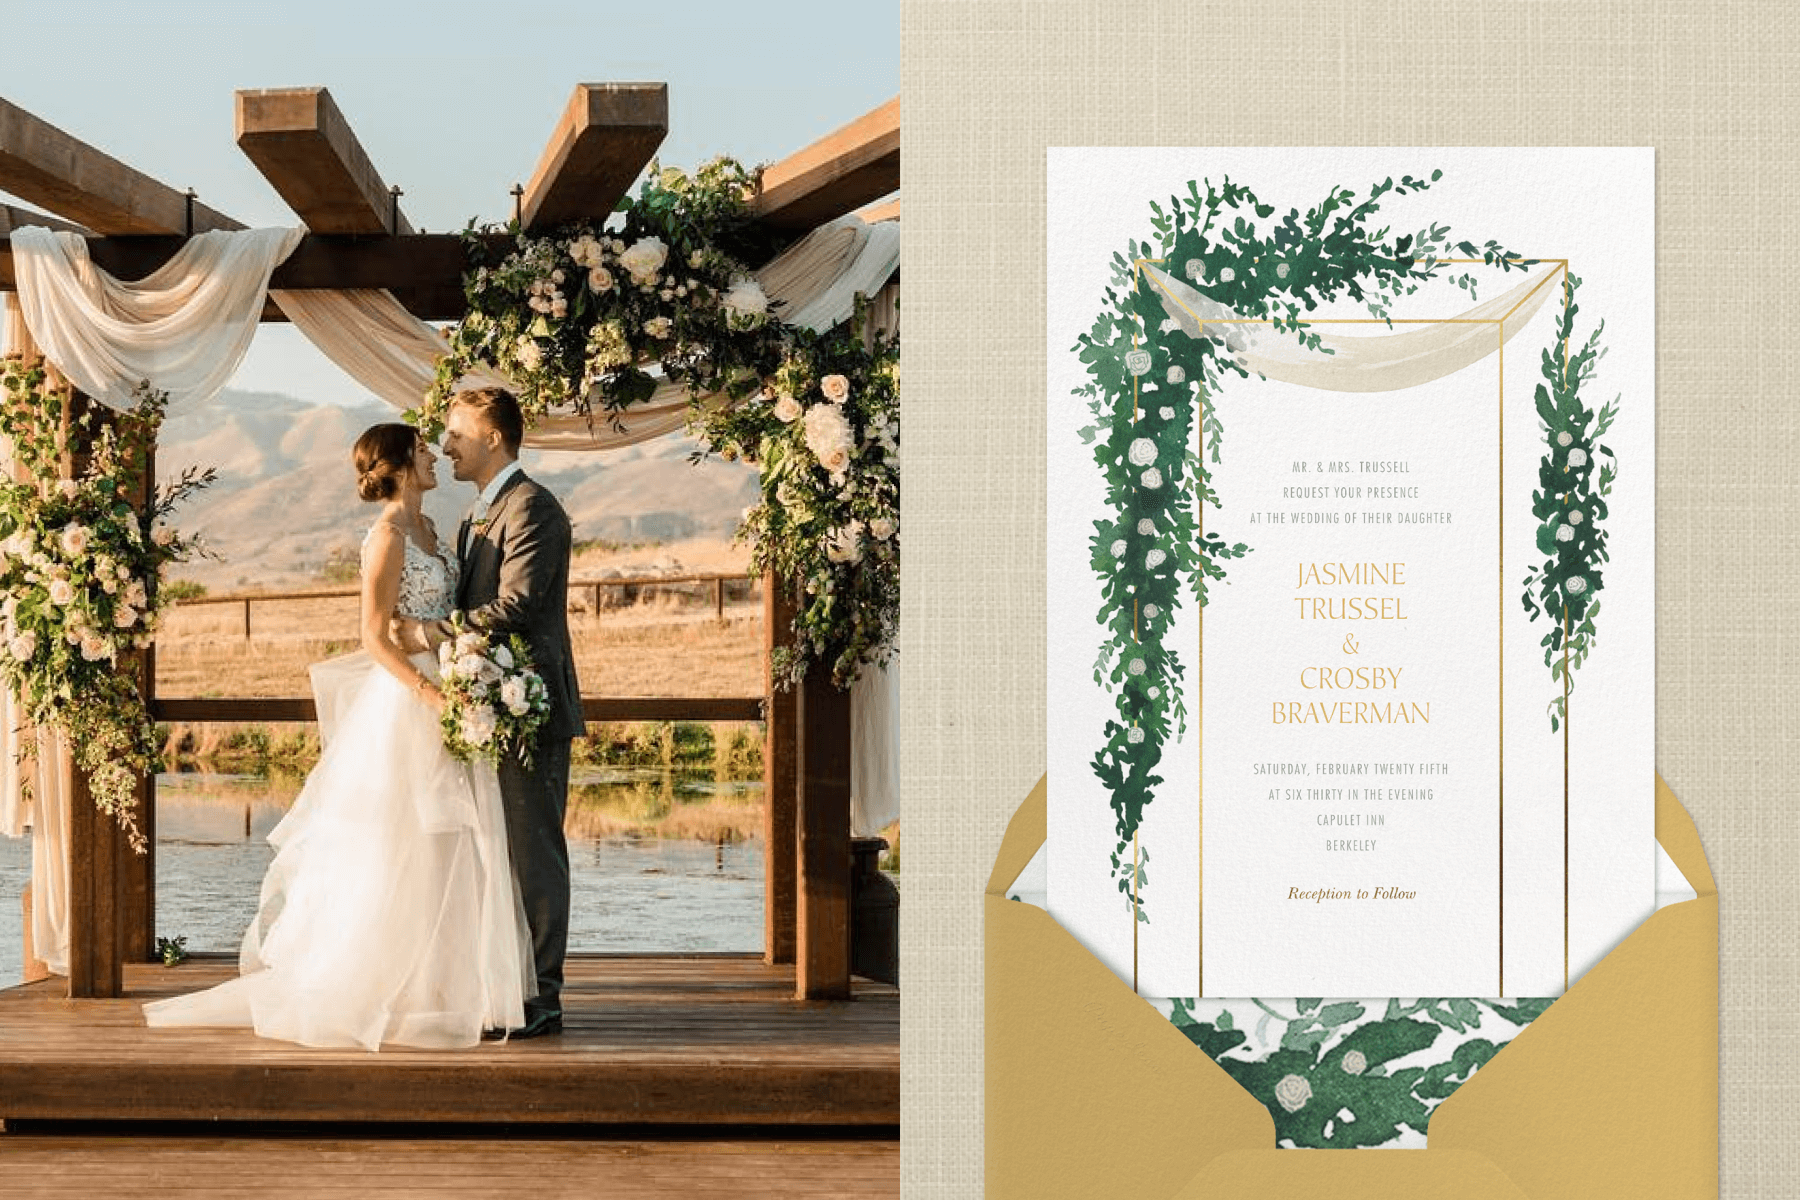 Left: A couple in wedding attire embrace under a wooden wedding arbor. Right: A wedding invitation with a chuppah and greenery trailing off it.